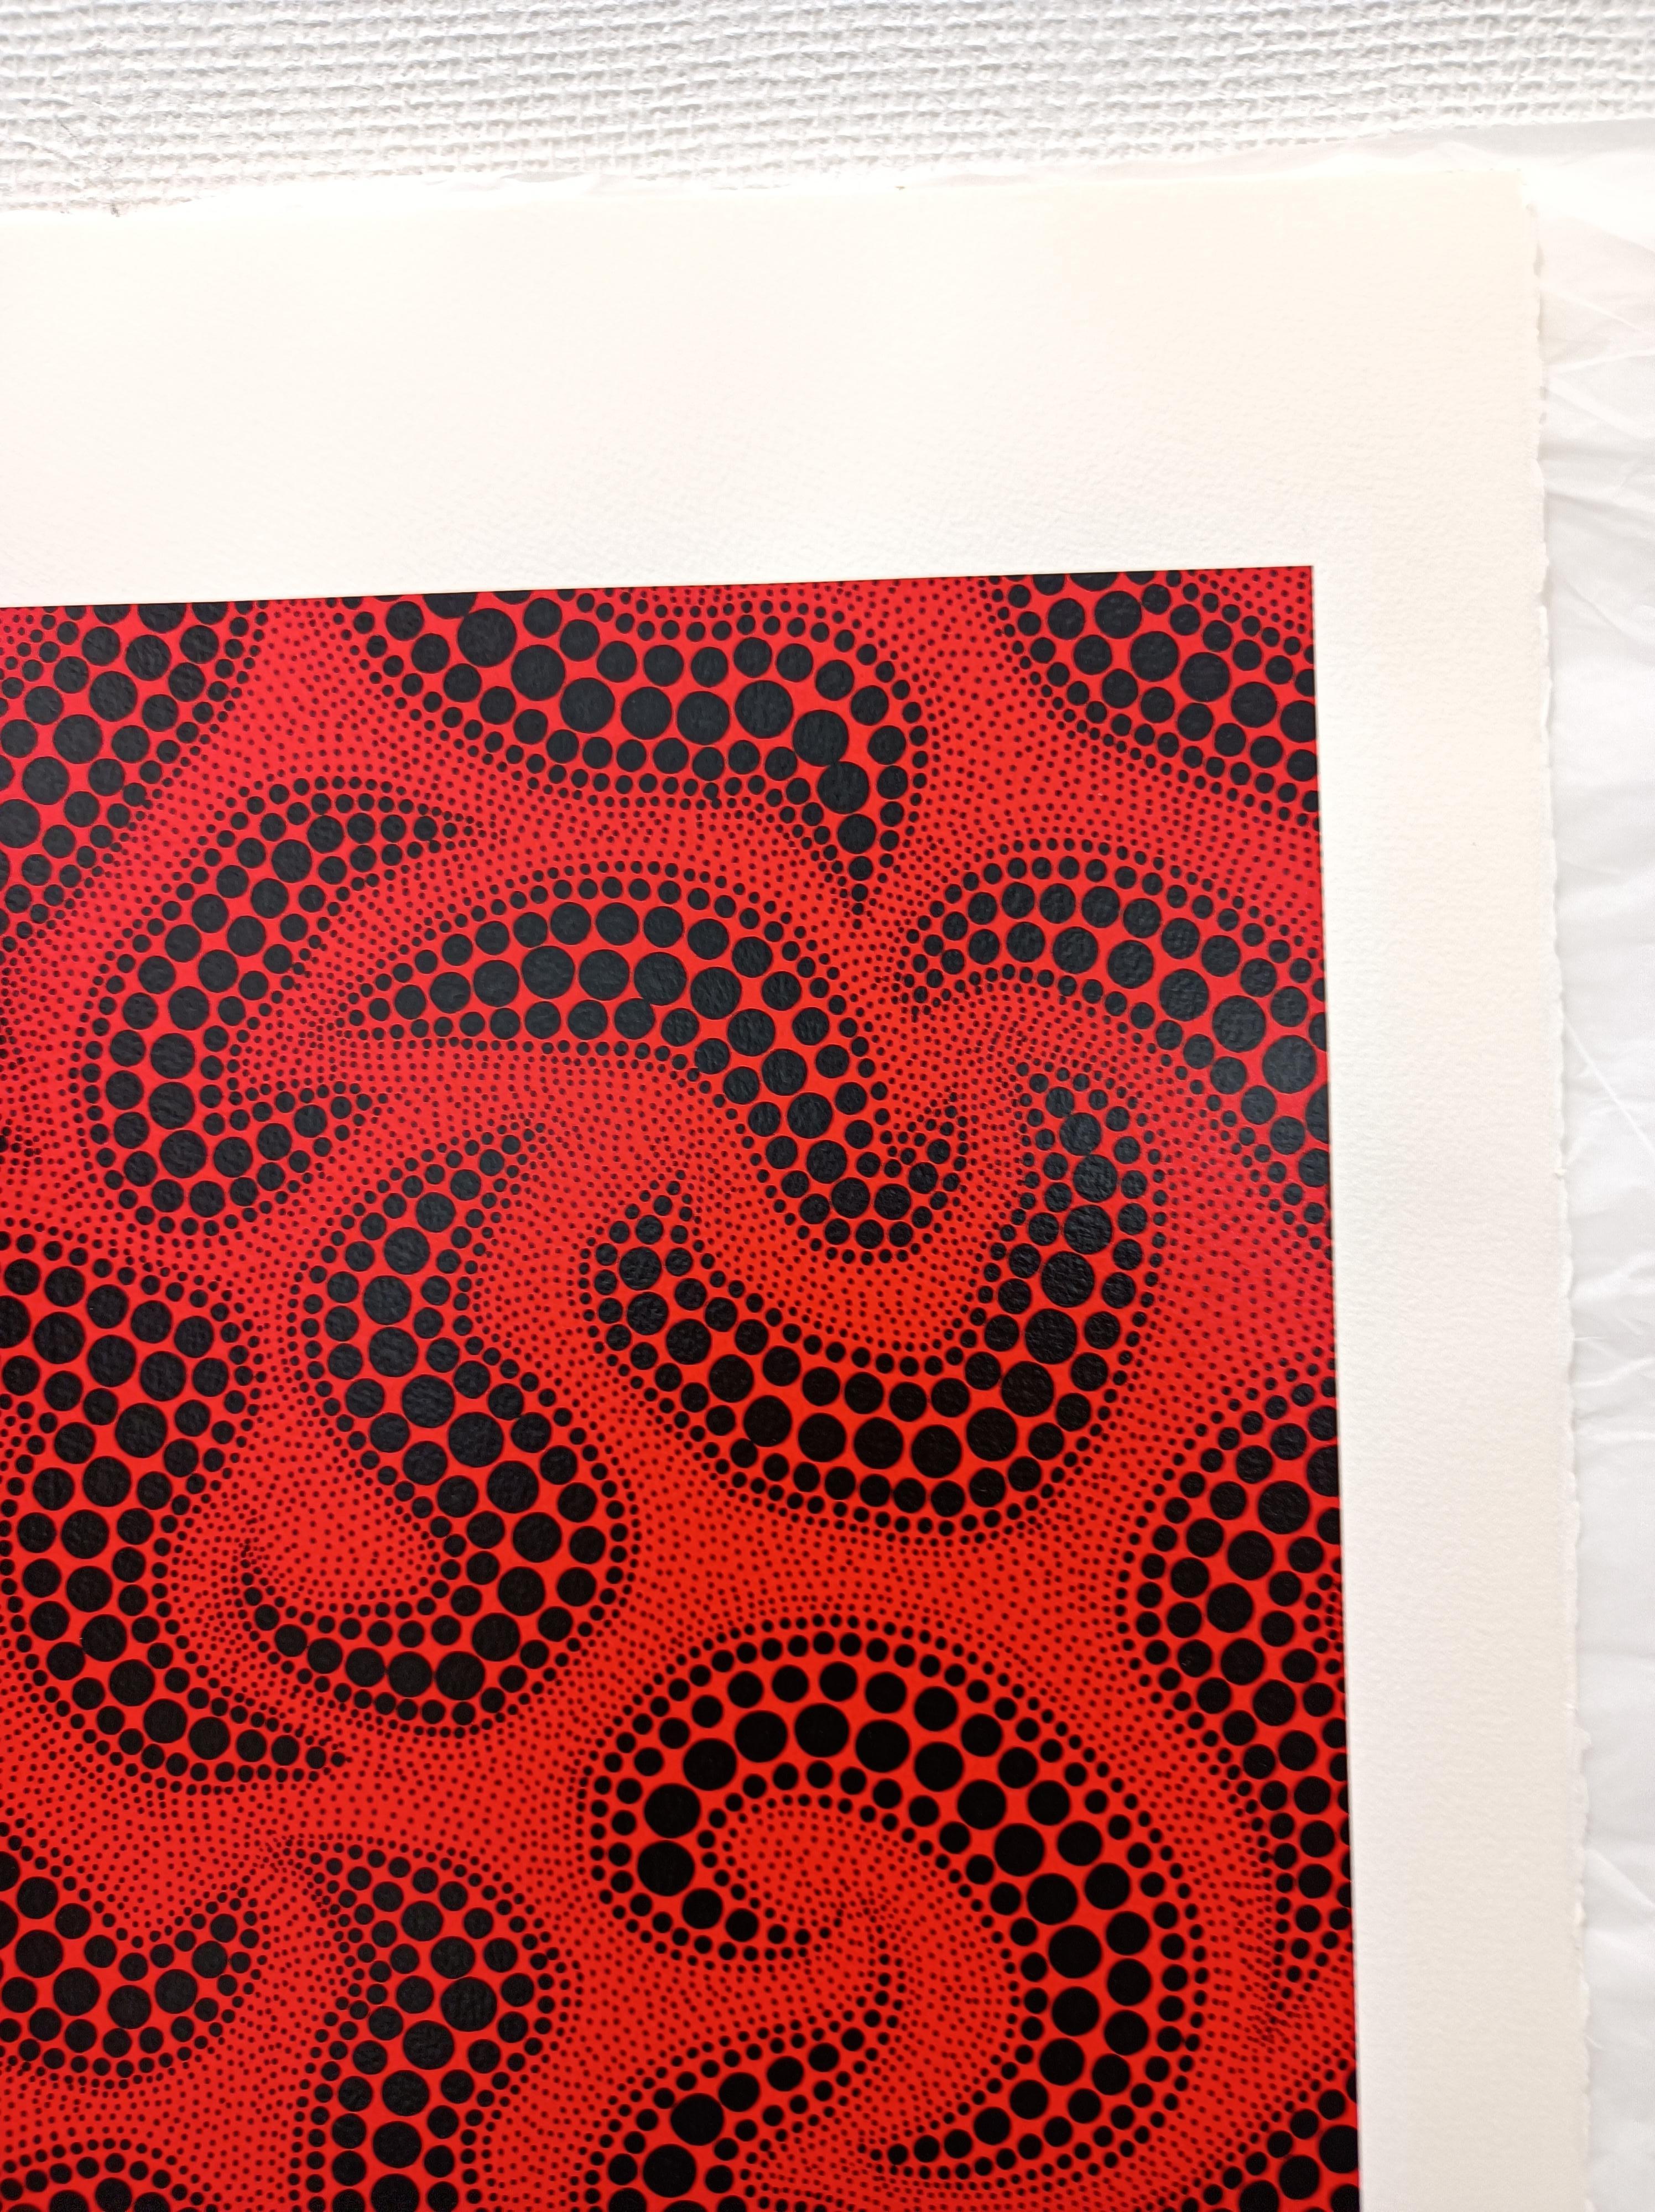 Yayoi Kusama 
Wave Crest (1999). Edition 15/60
Screenprint
[3 screens, 2 colors, 3 runs]
59.7 x 47.8 cm (image) 
76x 56.5cm  (sheet)
Edition of 60 + 6 Artist Proofs + 5 Printer Proofs 
Published in 1999 on Velin d'Arches paper by Okabe Tokuzo